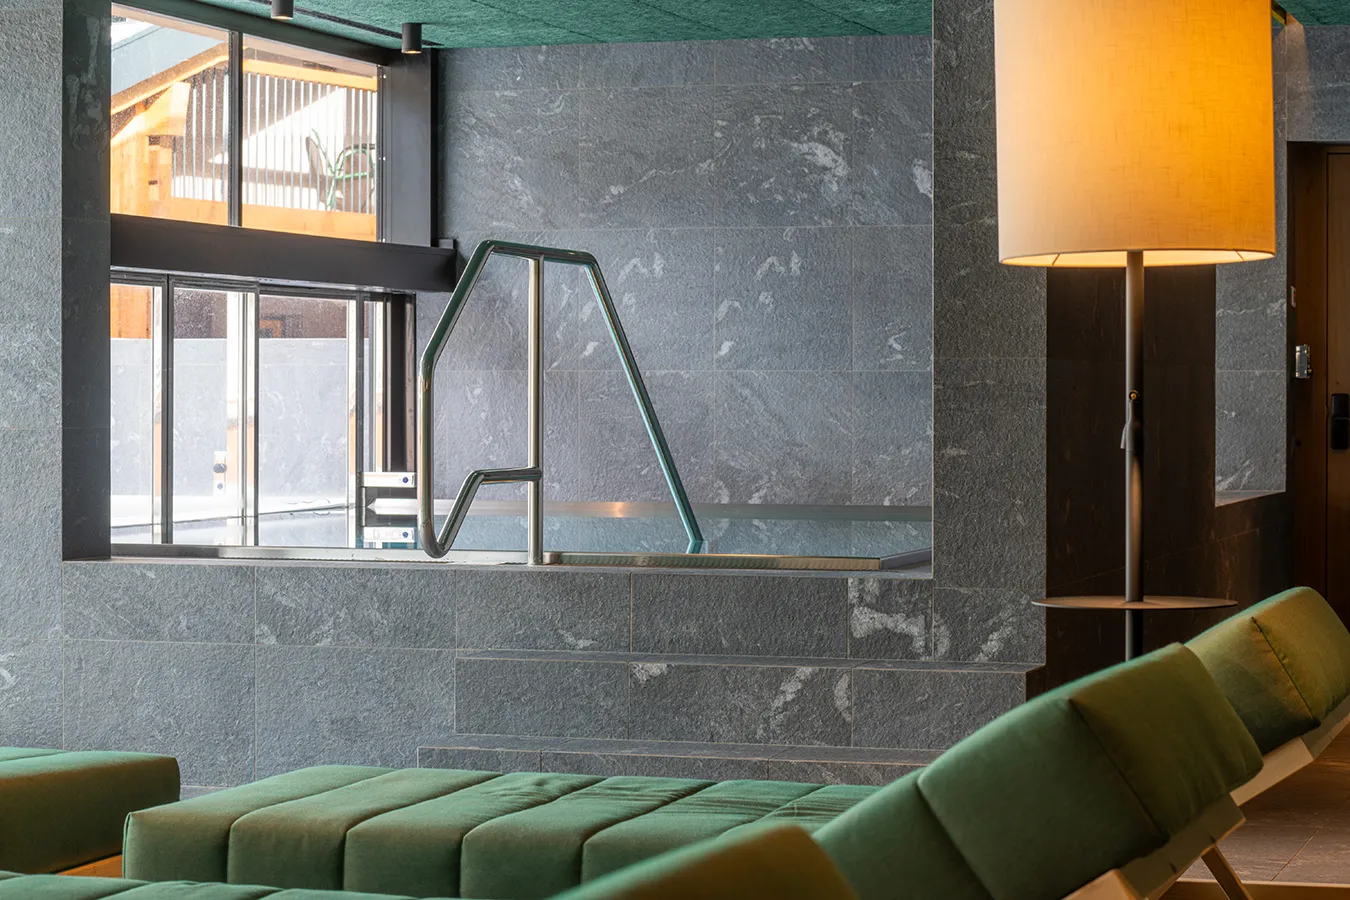 Alpenroyal Hotel interior with chic dark grey spa cladding from the Percorsi Frame collection in Cosmic Black color.